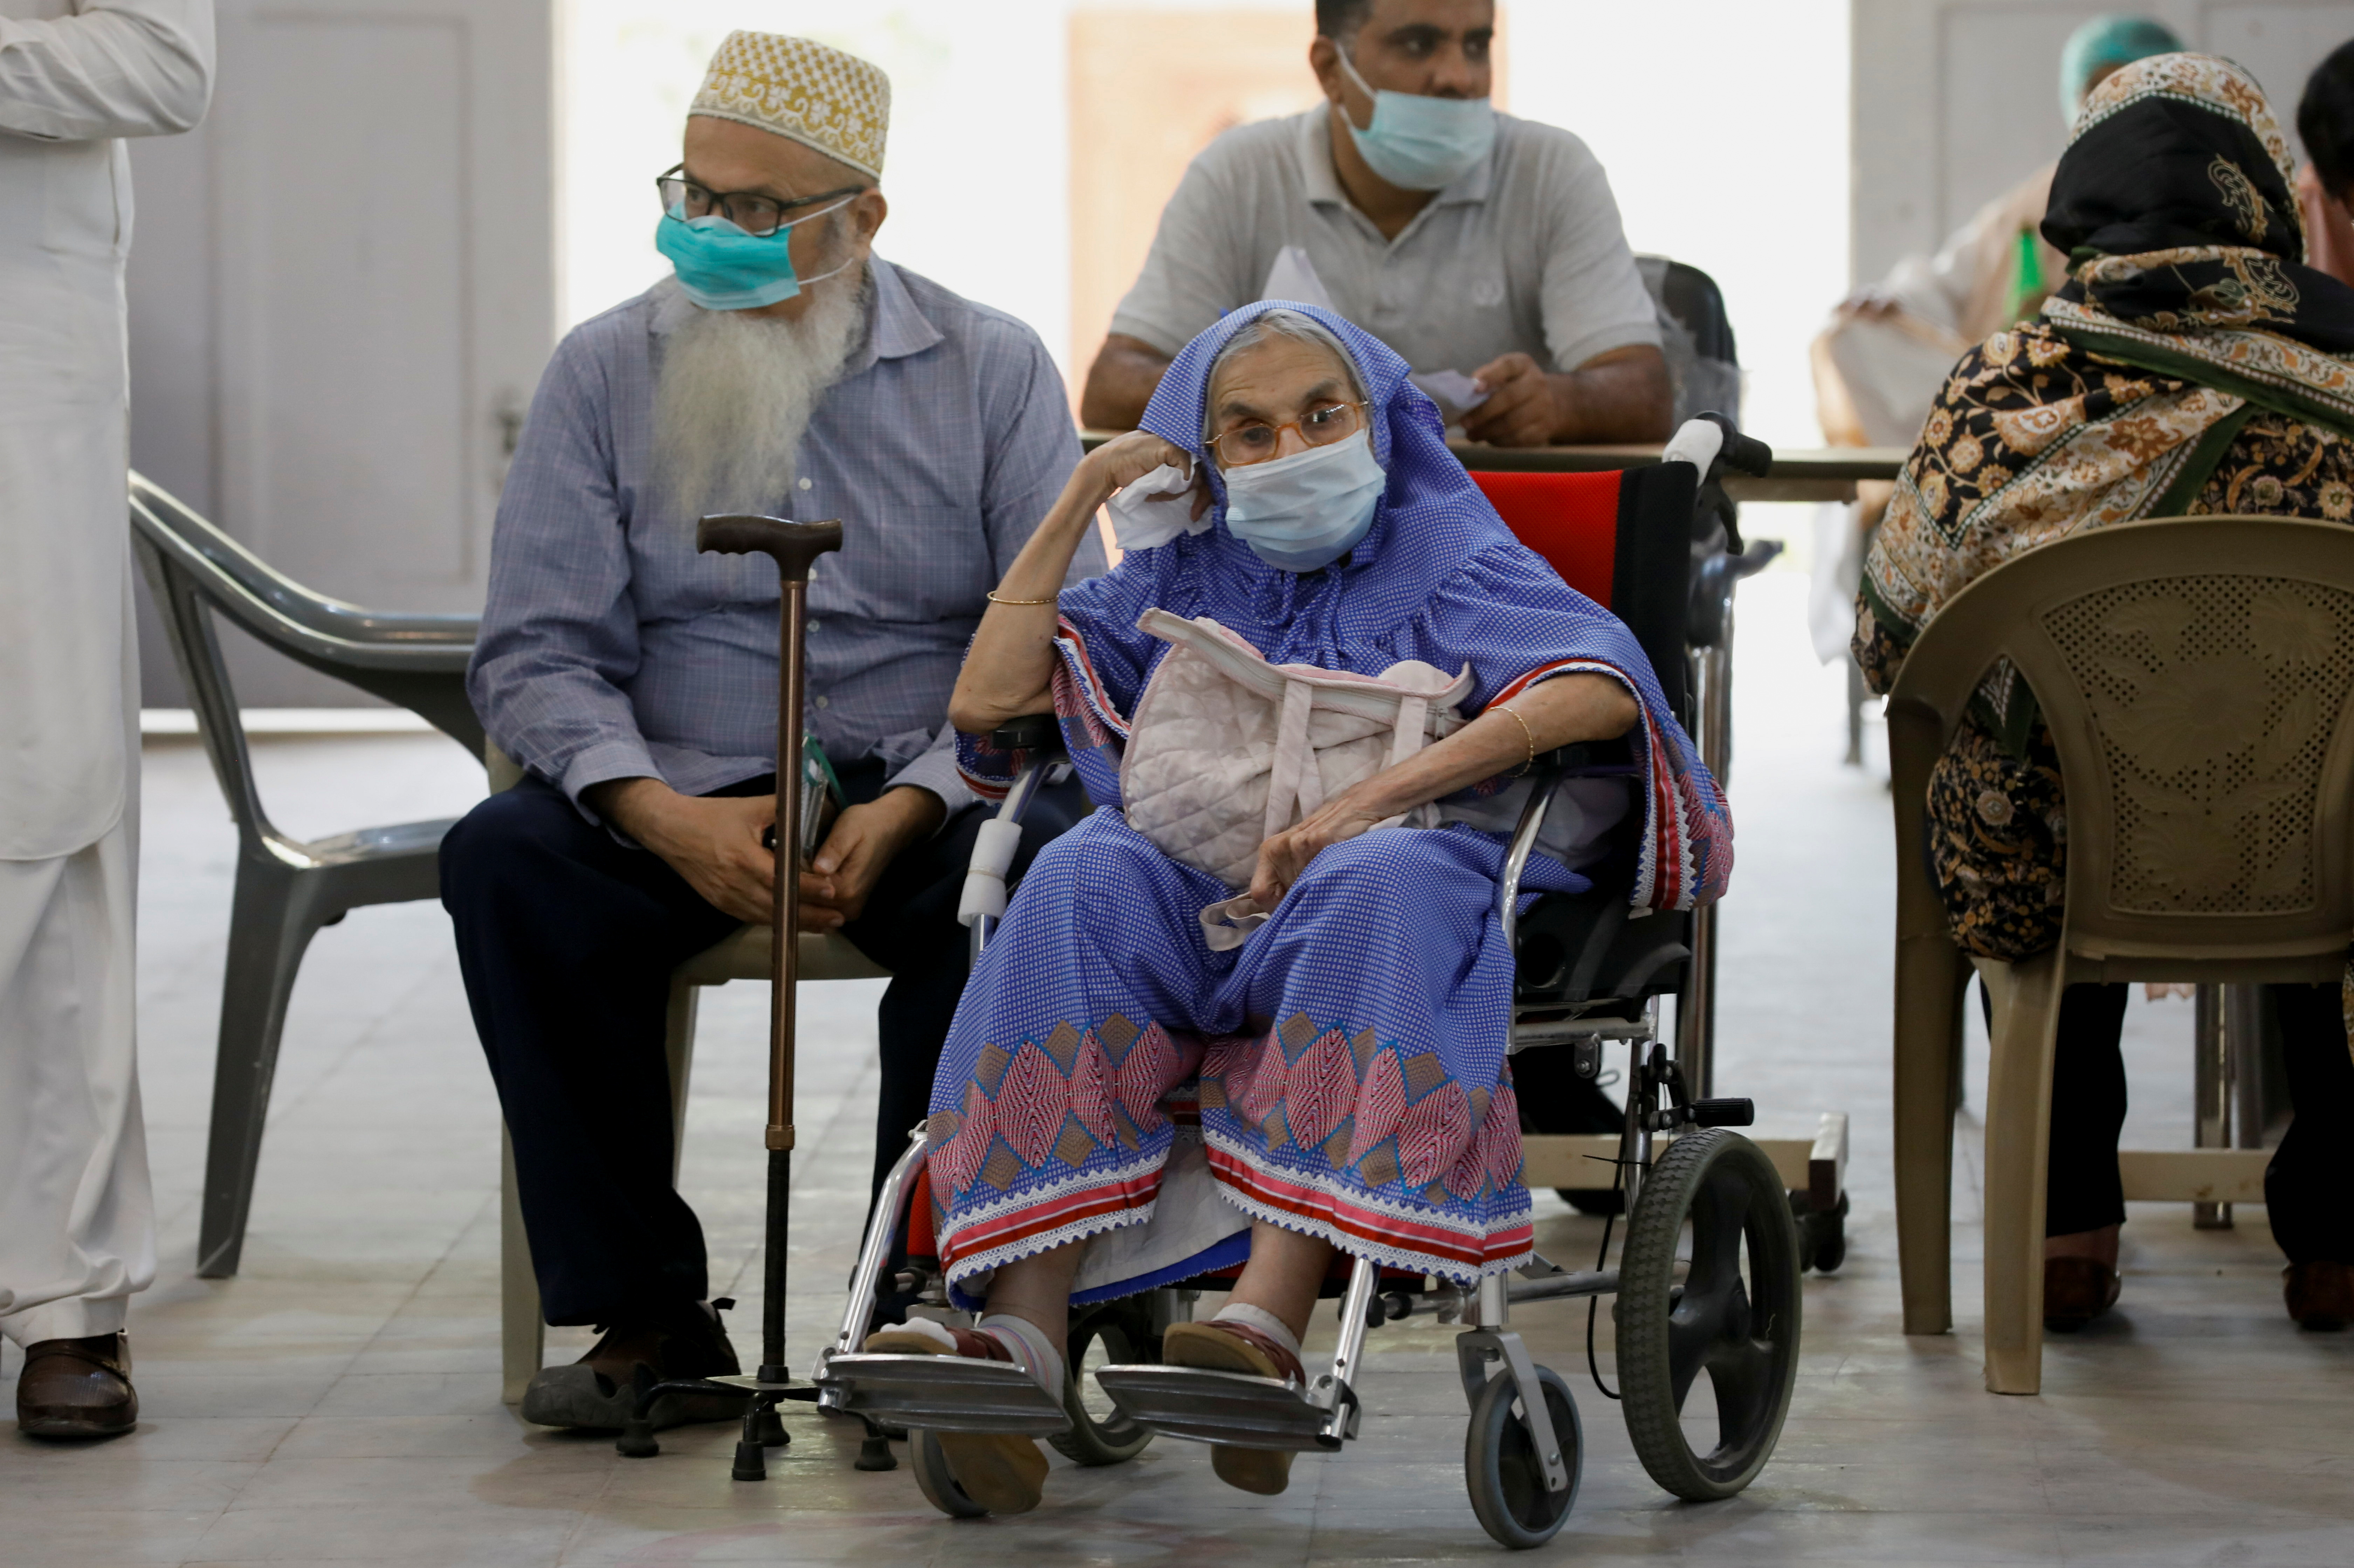 Residents wait for their coronavirus disease (COVID-19) vaccine doses, at a vaccination center in Karachi,